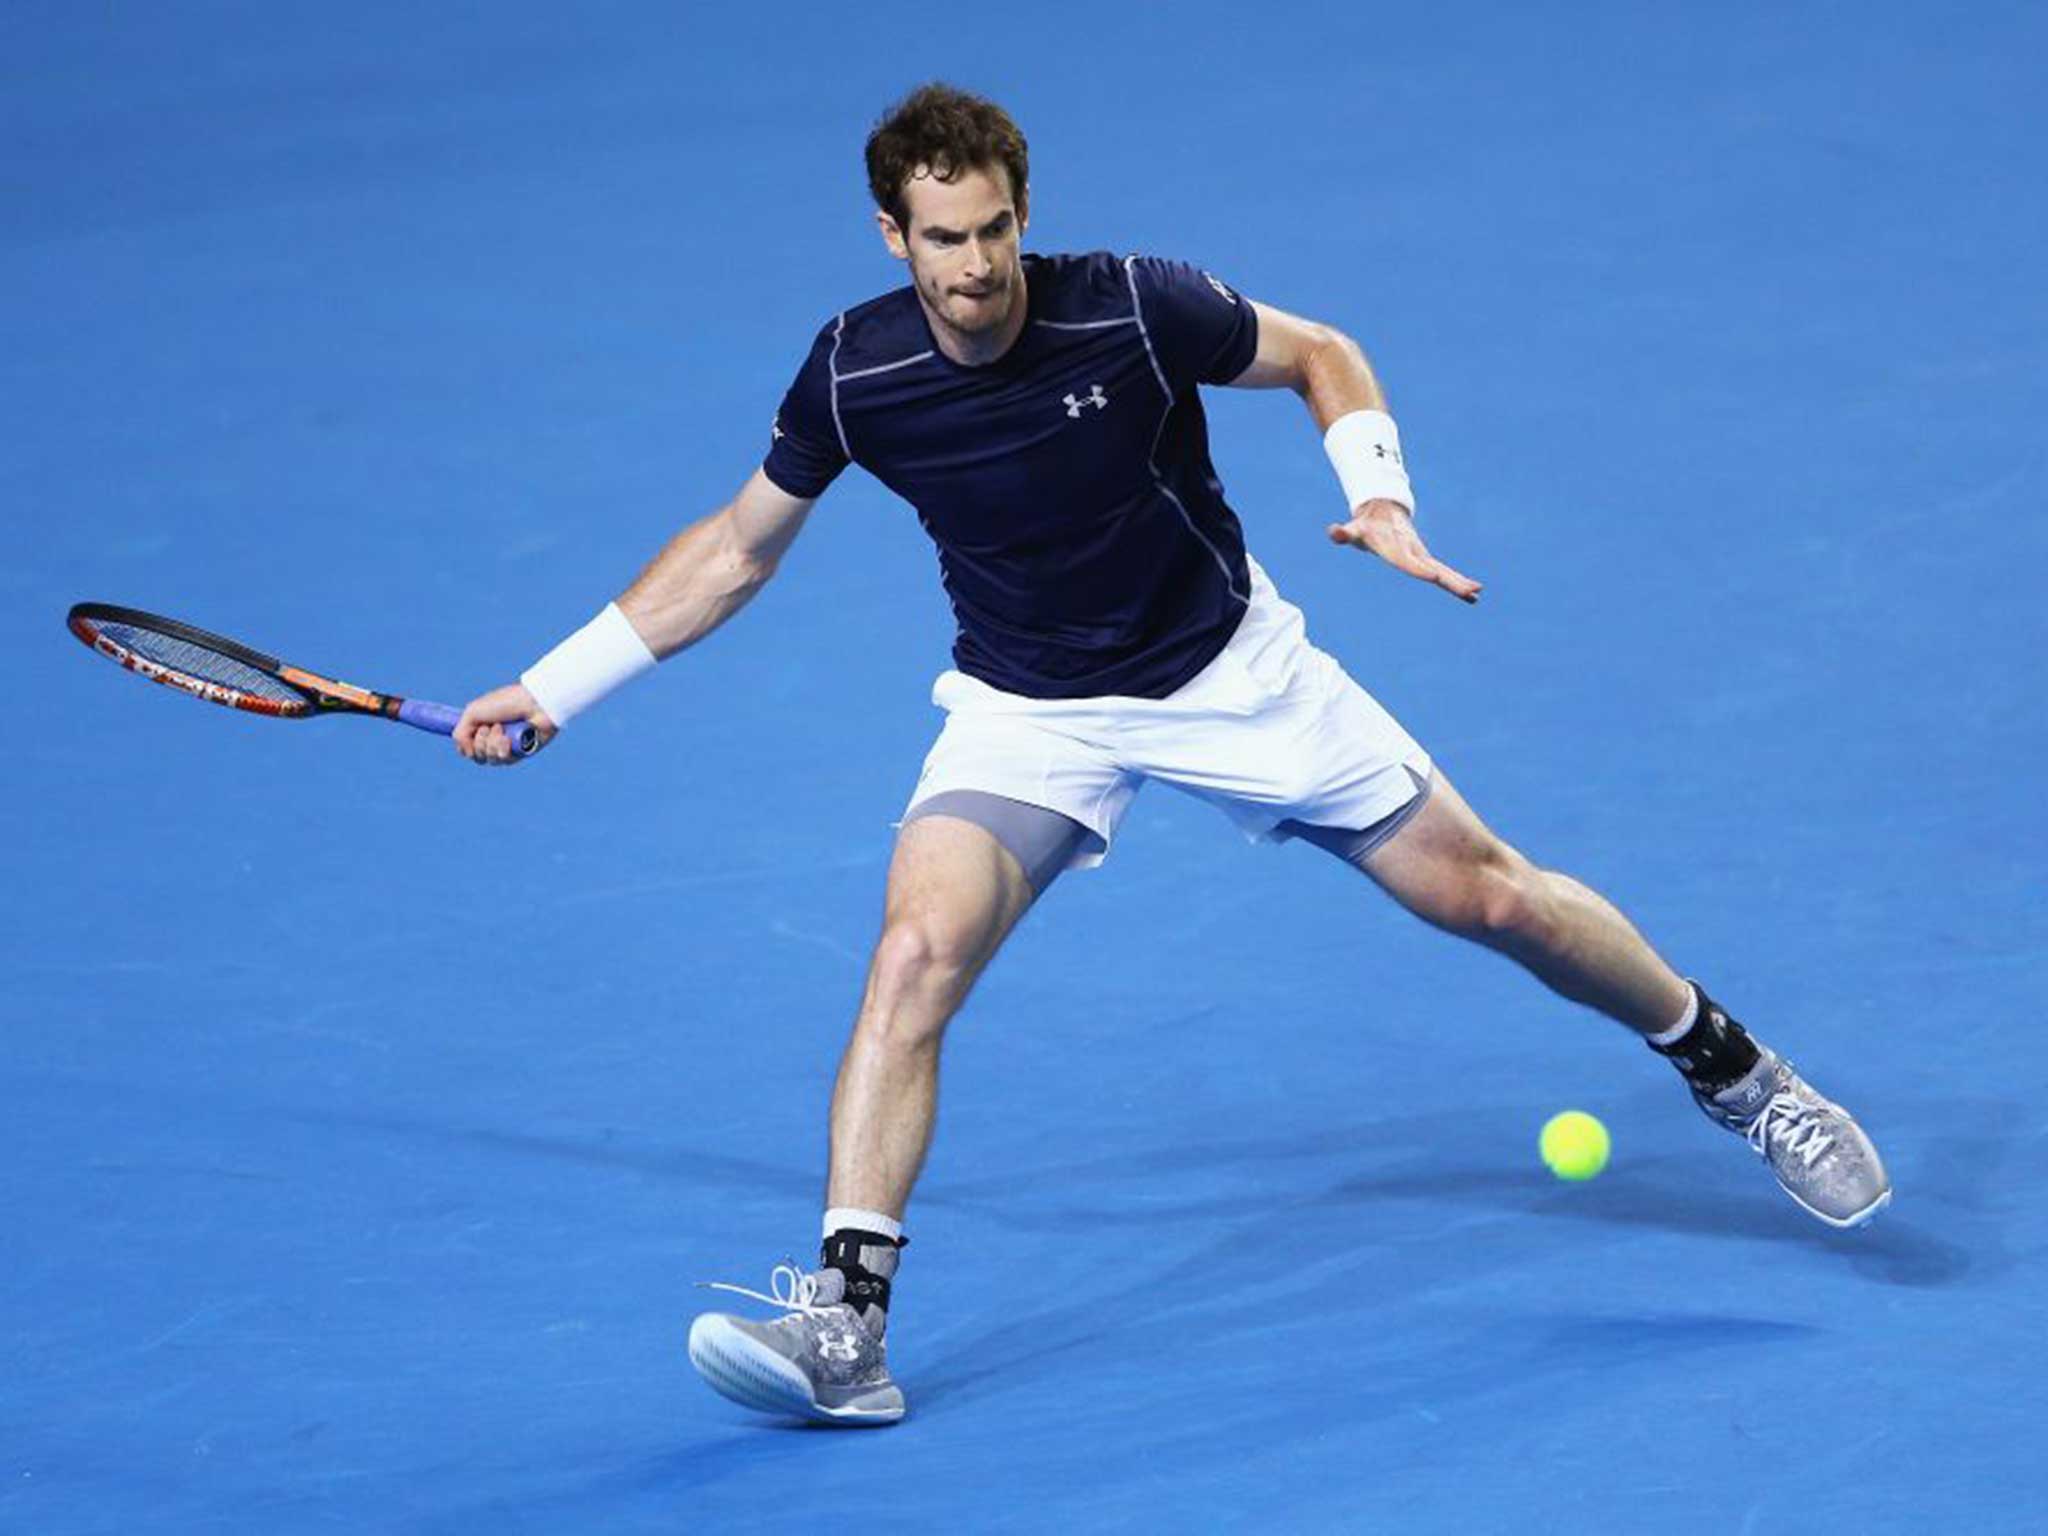 Andy Murray stretches for a forehand in his singles match against Taro Daniel of Japan during day one of the Davis Cup